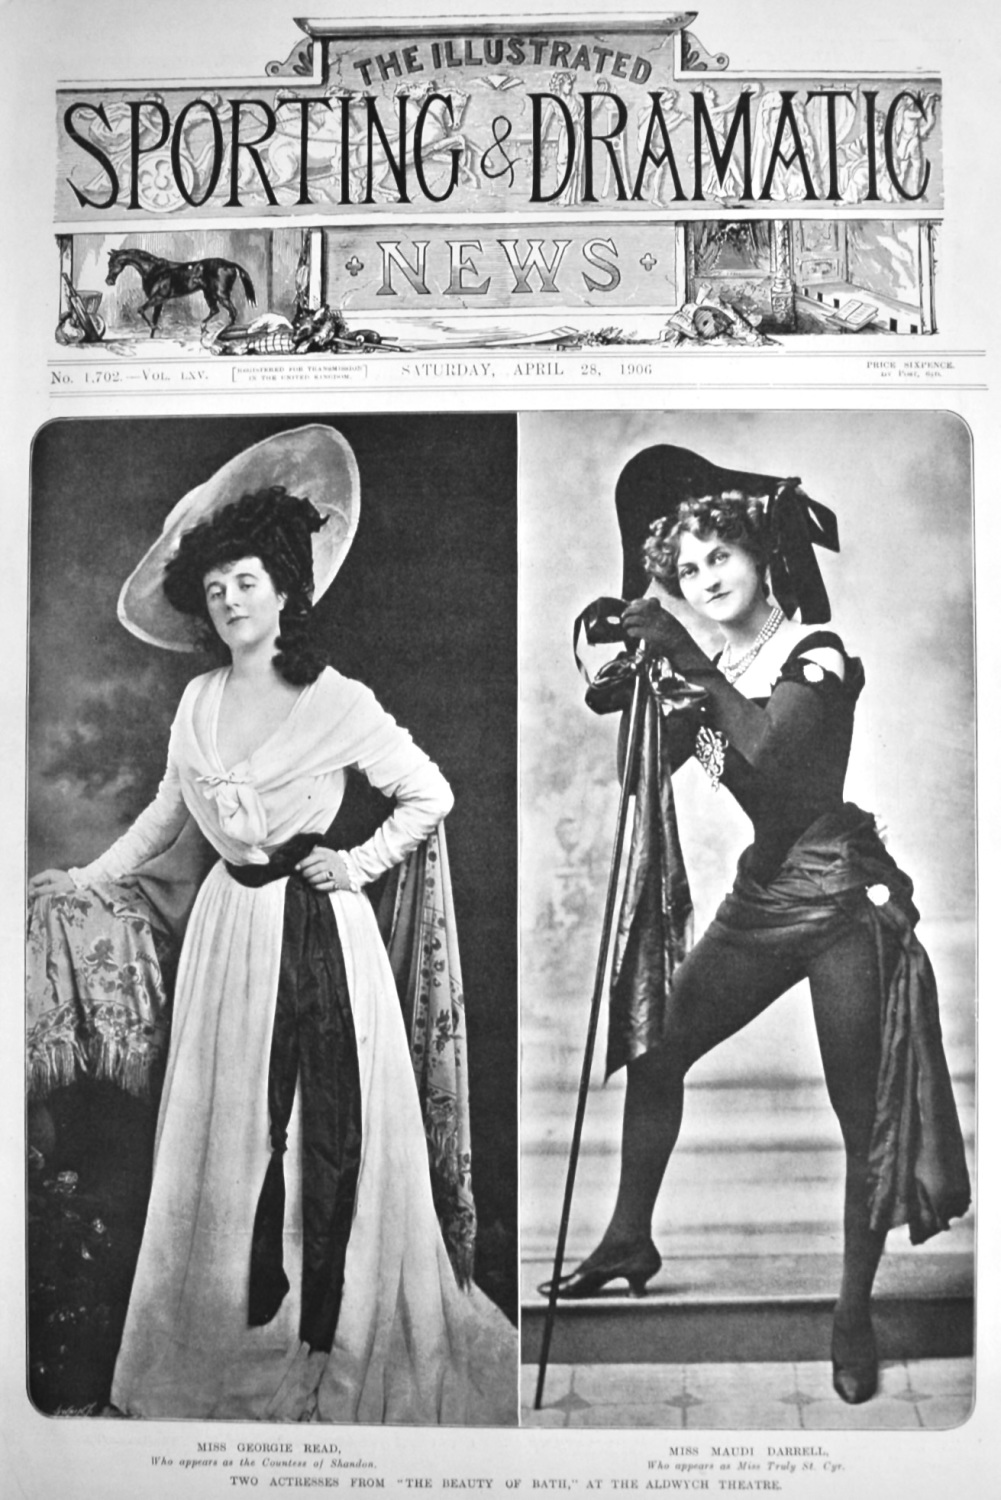 Miss Georgie Read, &  Miss Maudi Darrell. :  Two Actresses from 